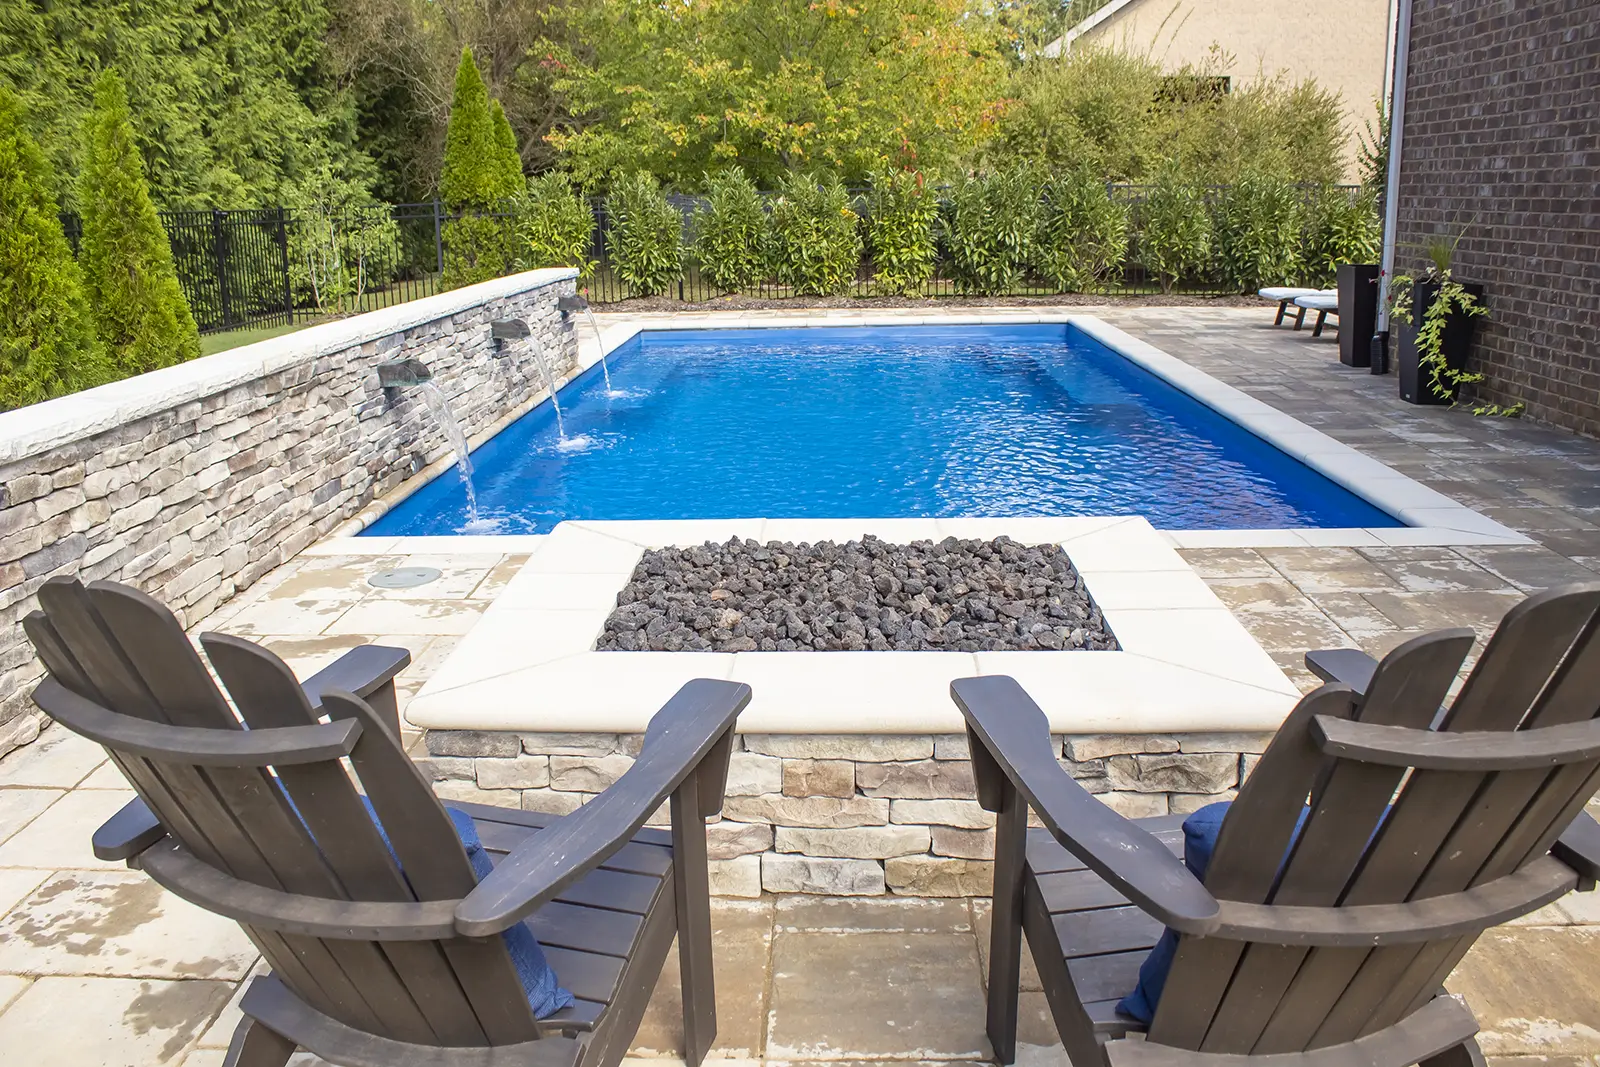 The Leisure Pools Supreme™ - a superb inground pool installation- from our fiberglass pool gallery